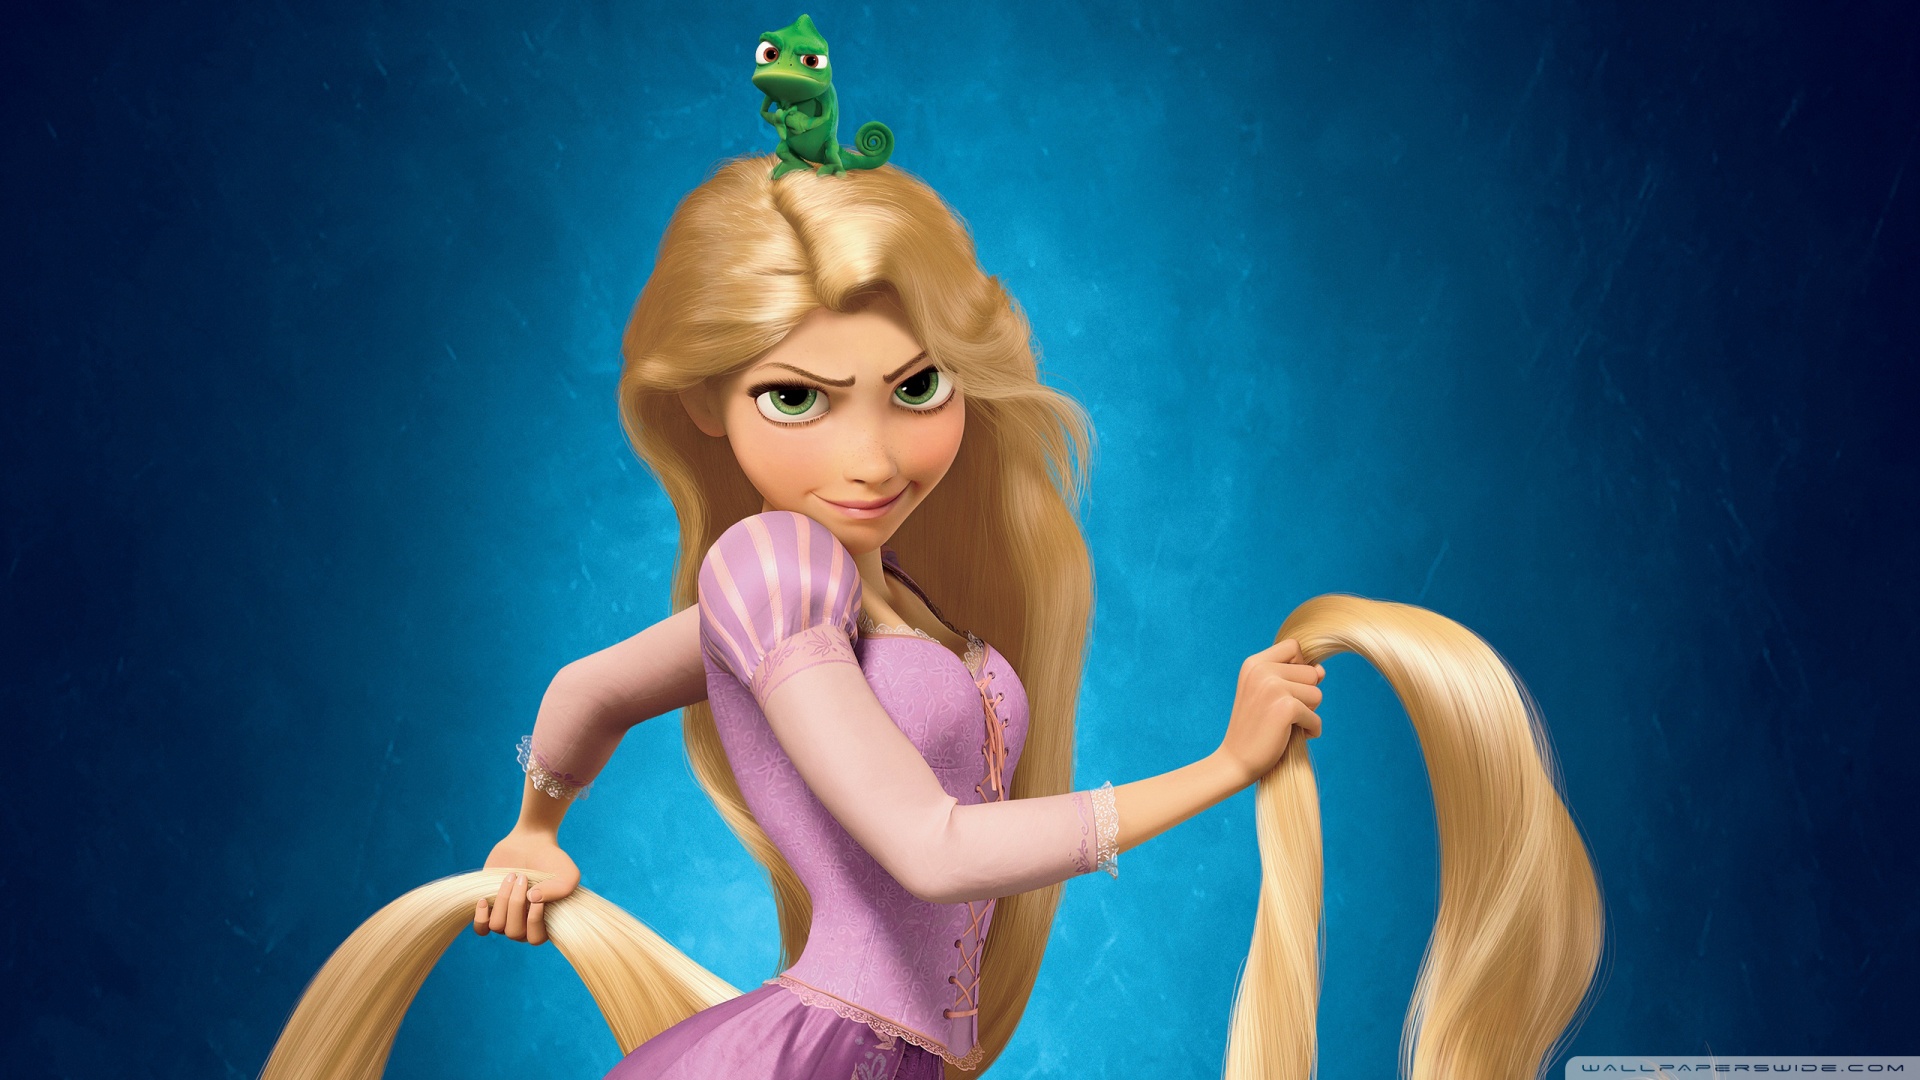 Tangled Wallpapers, Pictures, Images